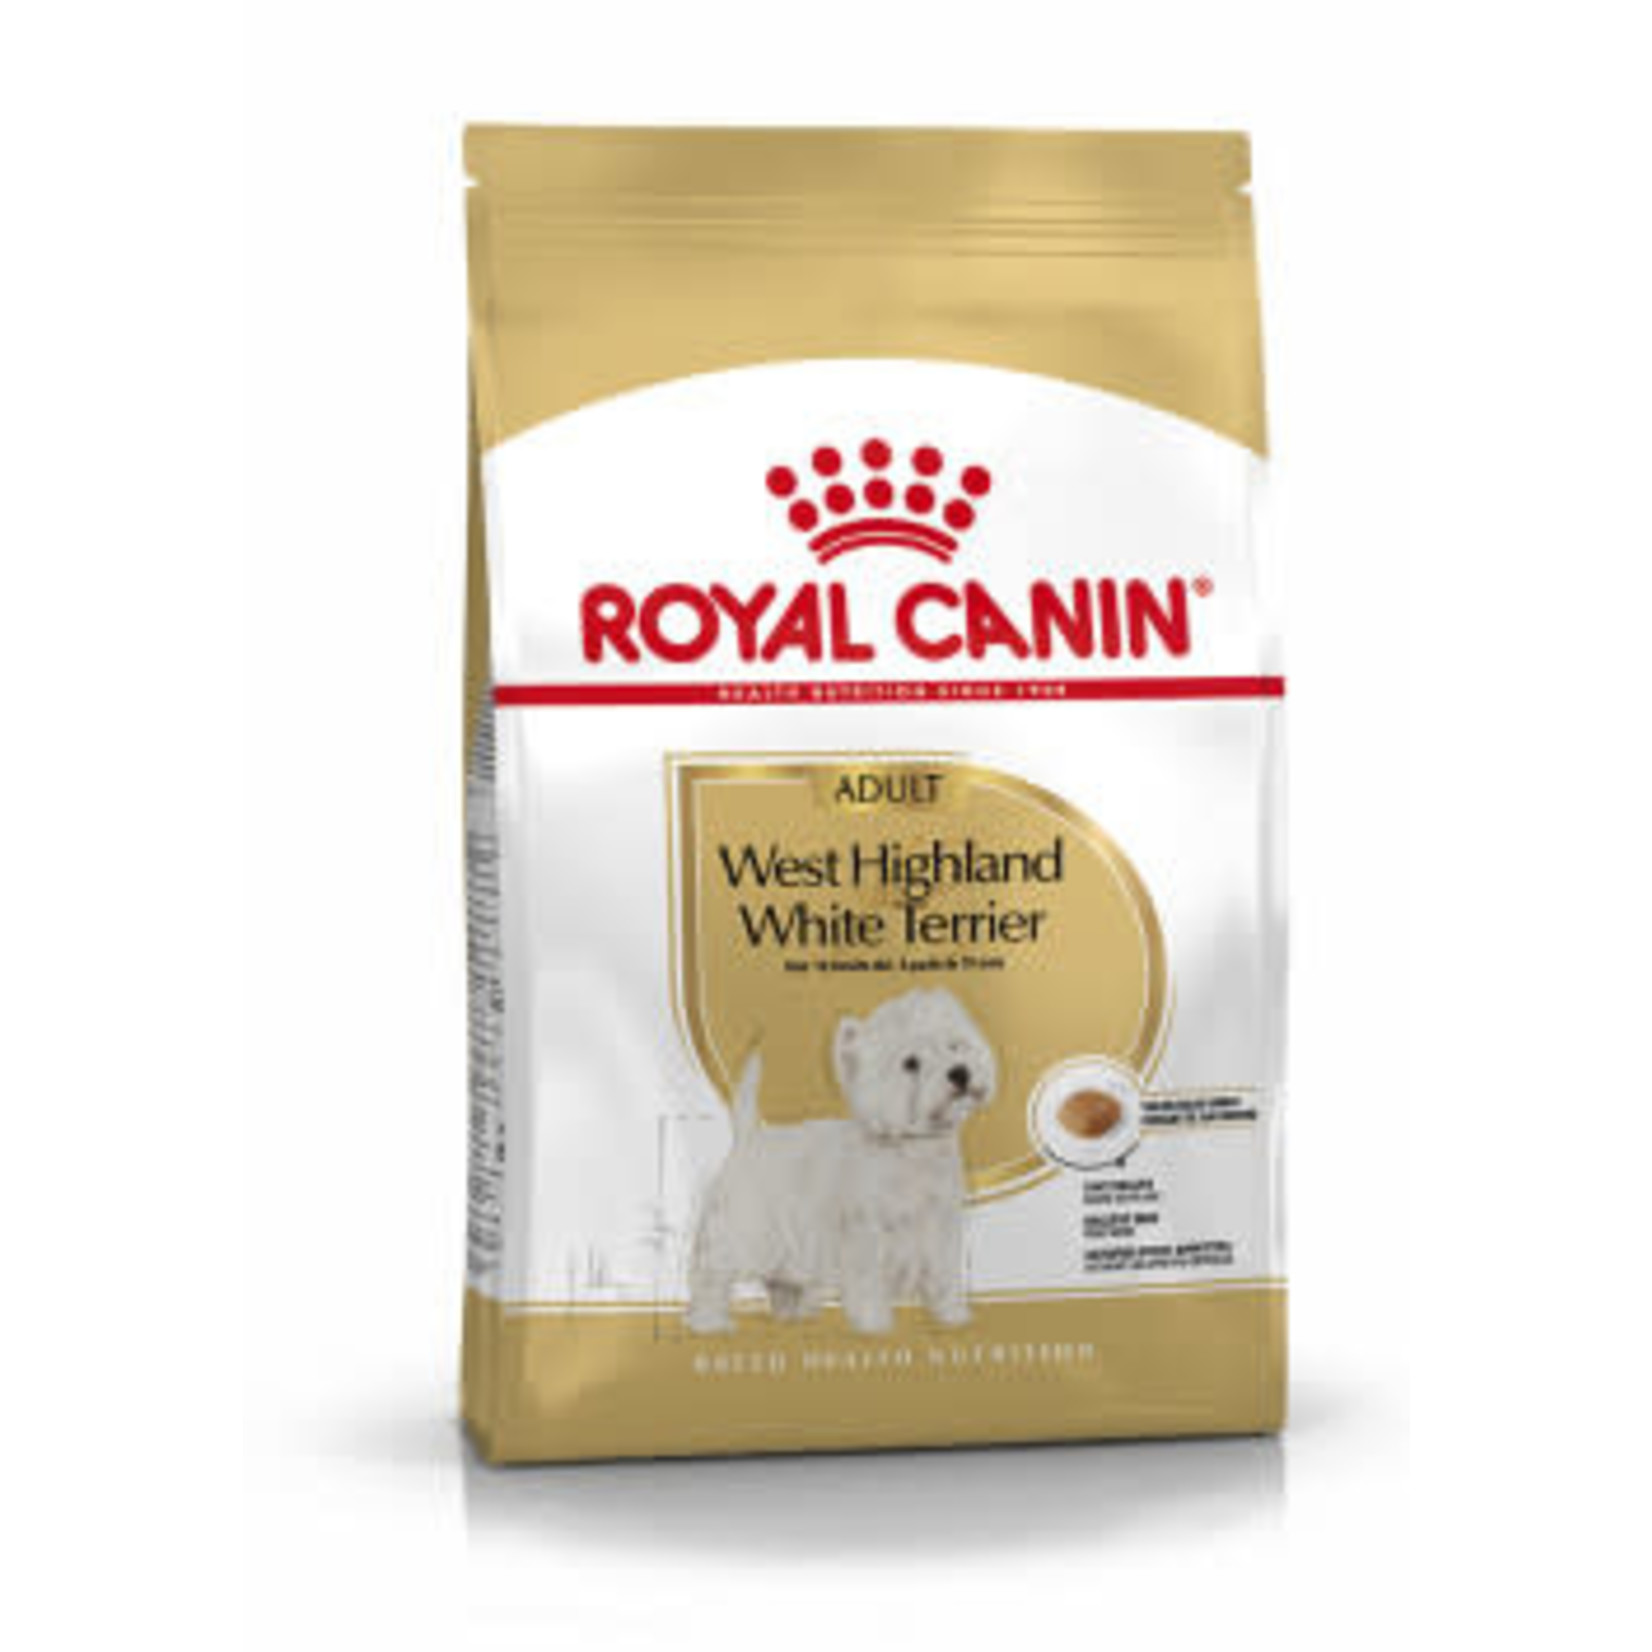 Royal Canin West Highland White Terrier Adult Dog Dry Food